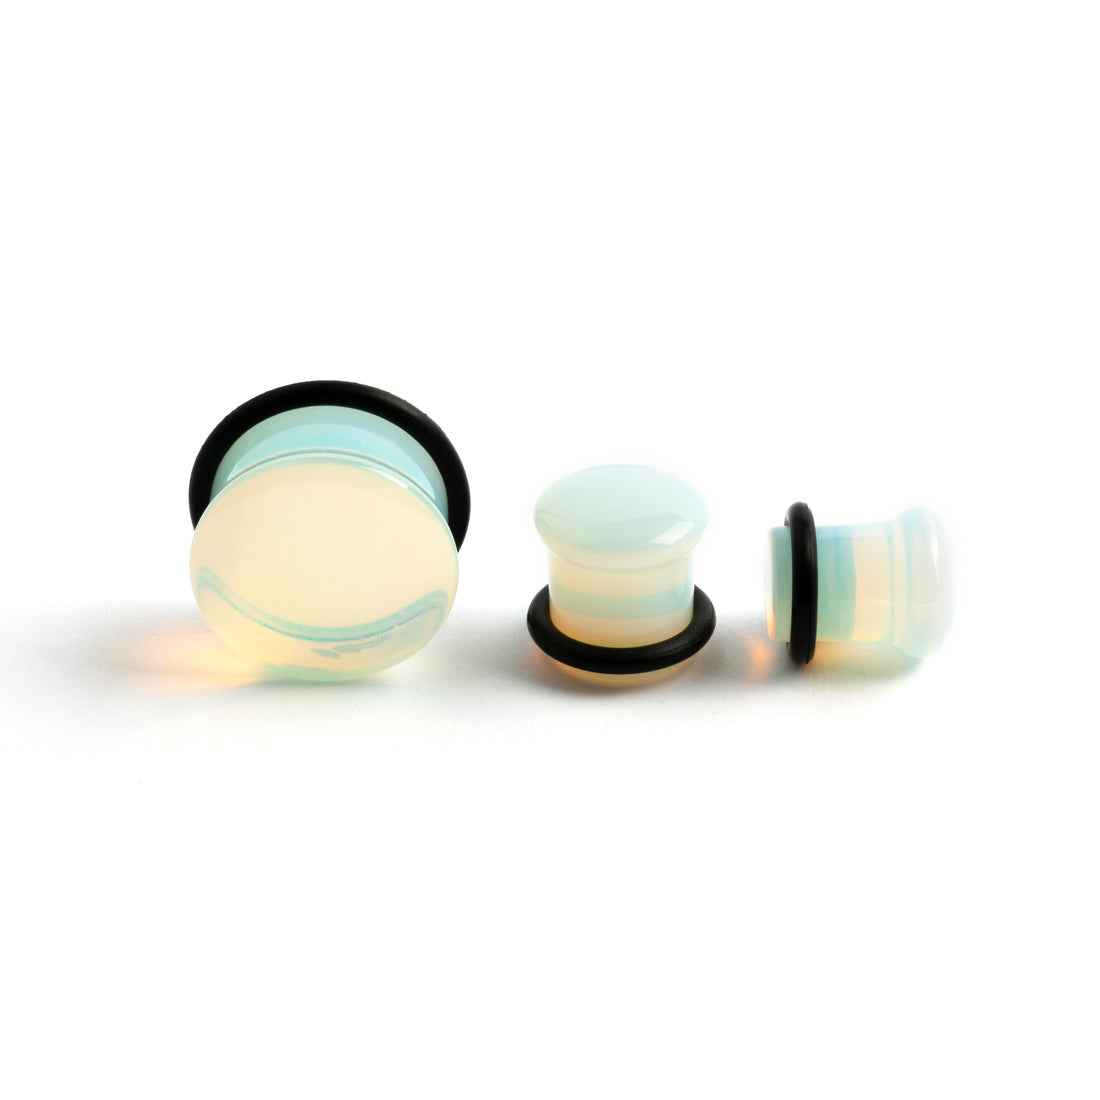 several sizes of Single flare Opalite stone ear plugs front and side view